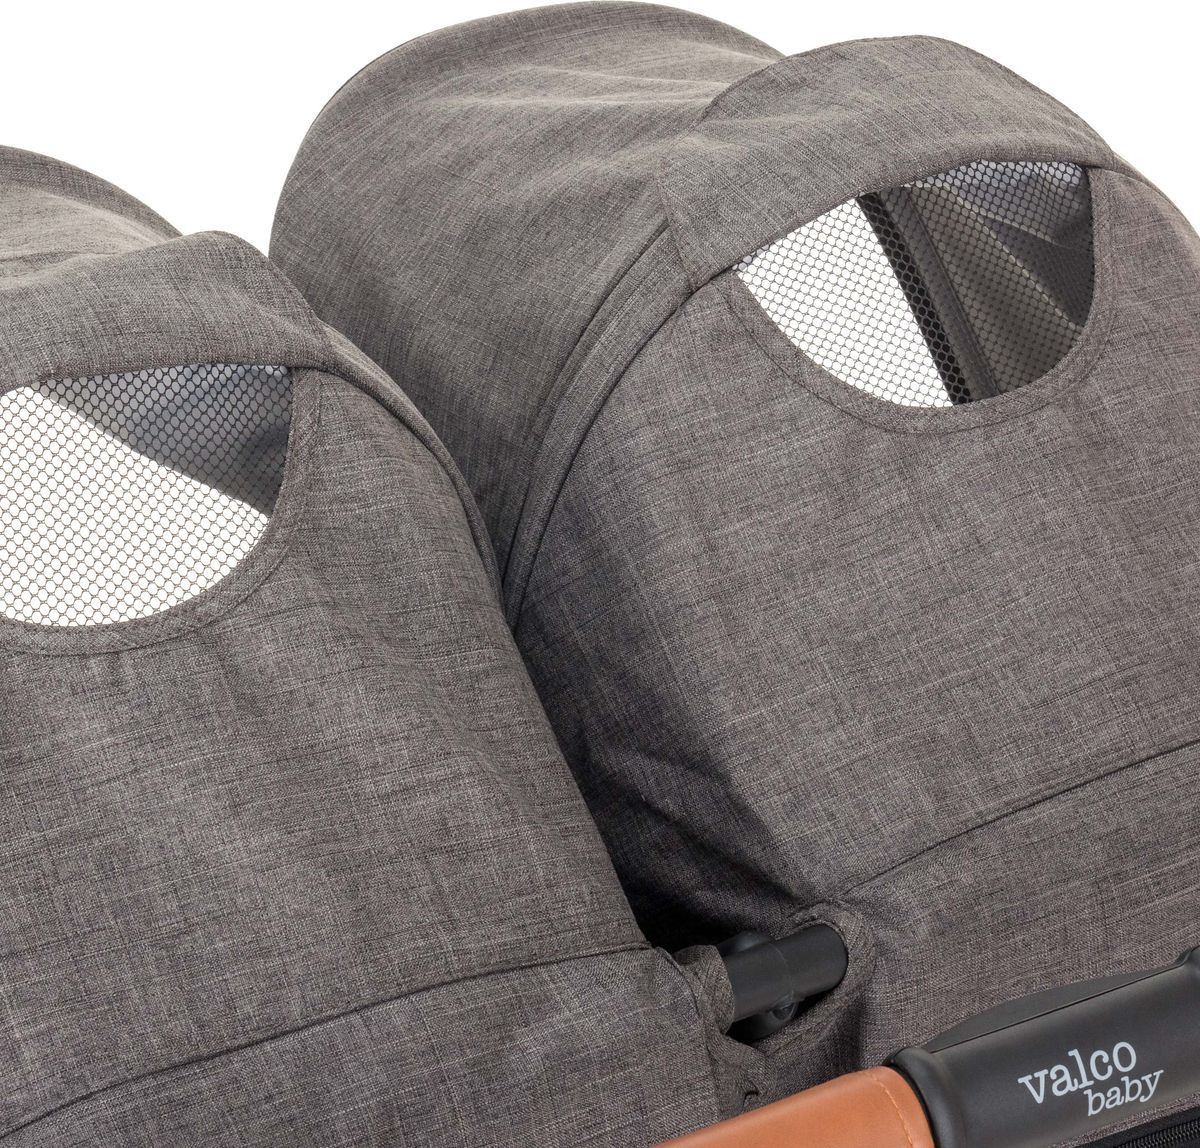   Valco Baby Snap Duo Trend Charcoal